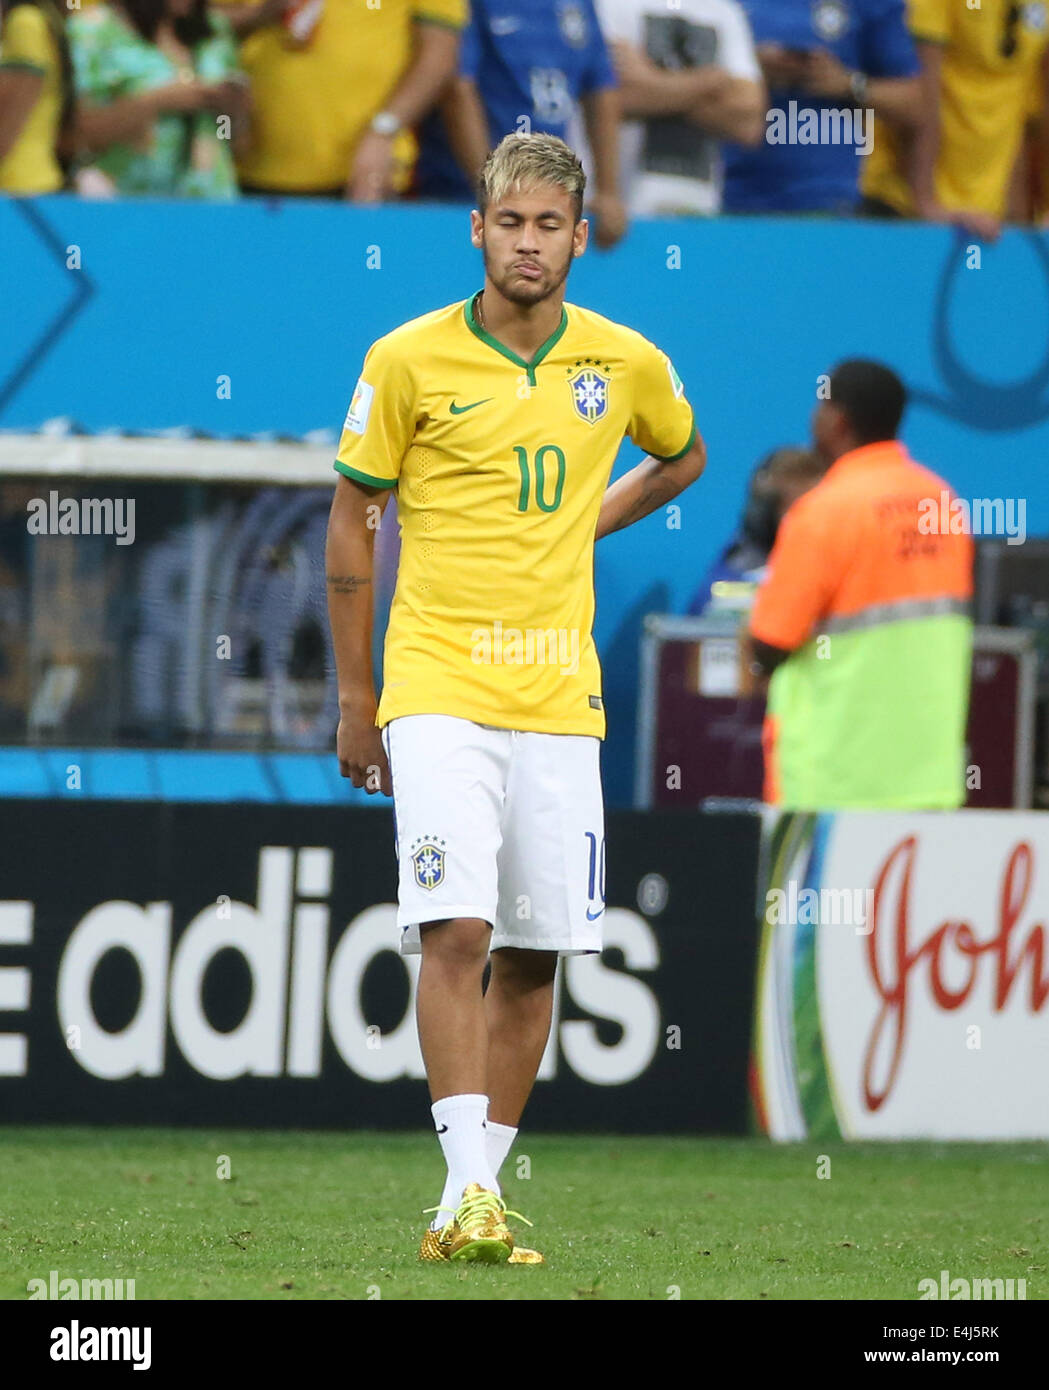 Brasilia, Brazil. 12th July, 2014. Brazil's Neymar reacts after the third place play-off match between Brazil and Netherlands of 2014 FIFA World Cup at the Estadio Nacional Stadium in Brasilia, Brazil, on July 12, 2014. Netherlands won 3-0 over Brazil and took the third place of the tournament on Saturday. Credit:  Cao Can/Xinhua/Alamy Live News Stock Photo